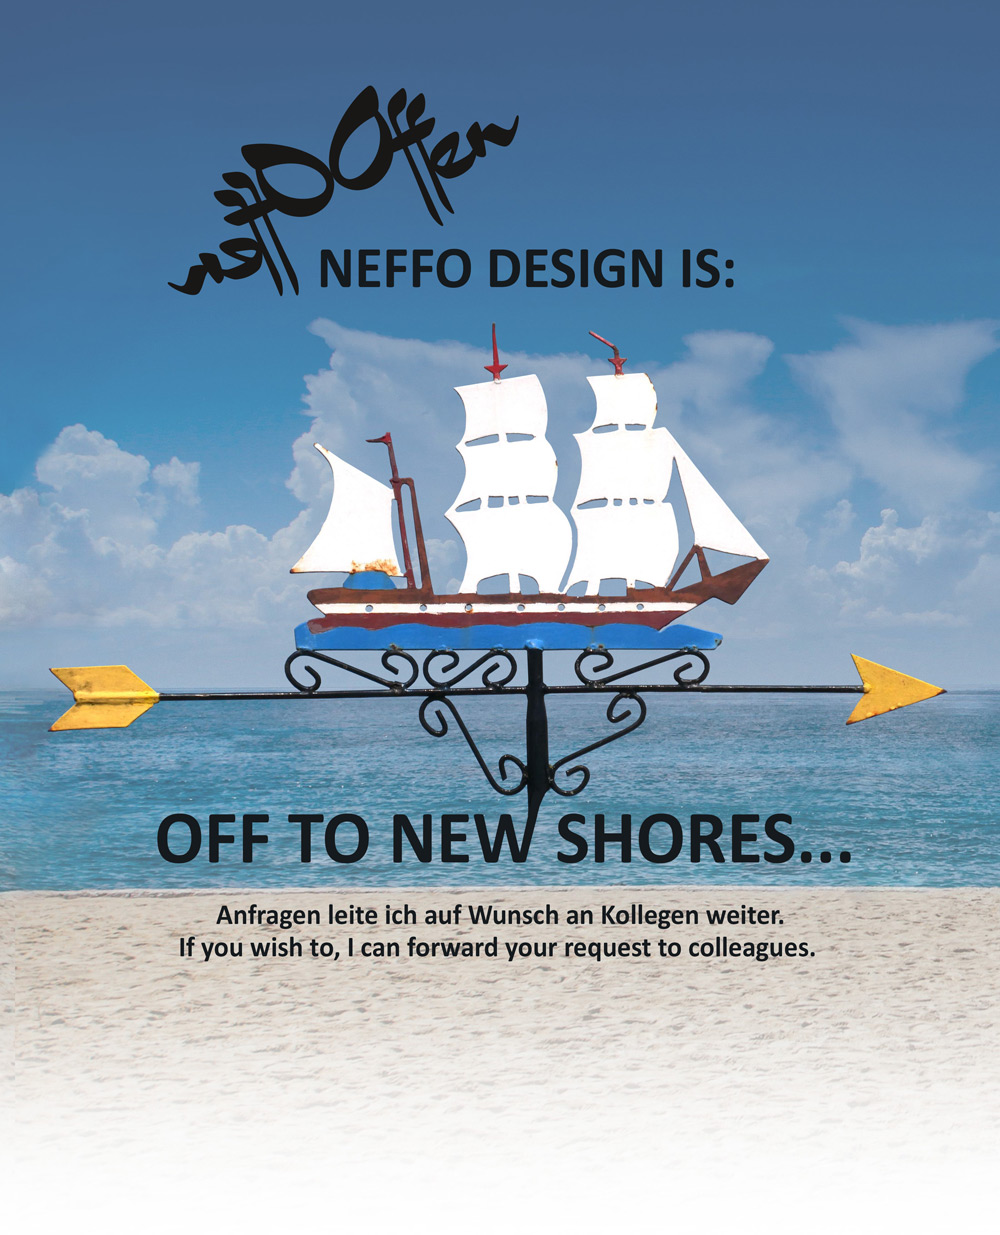 NEFFO DESIGN IS OFF TO NEW SHORES. BYE!